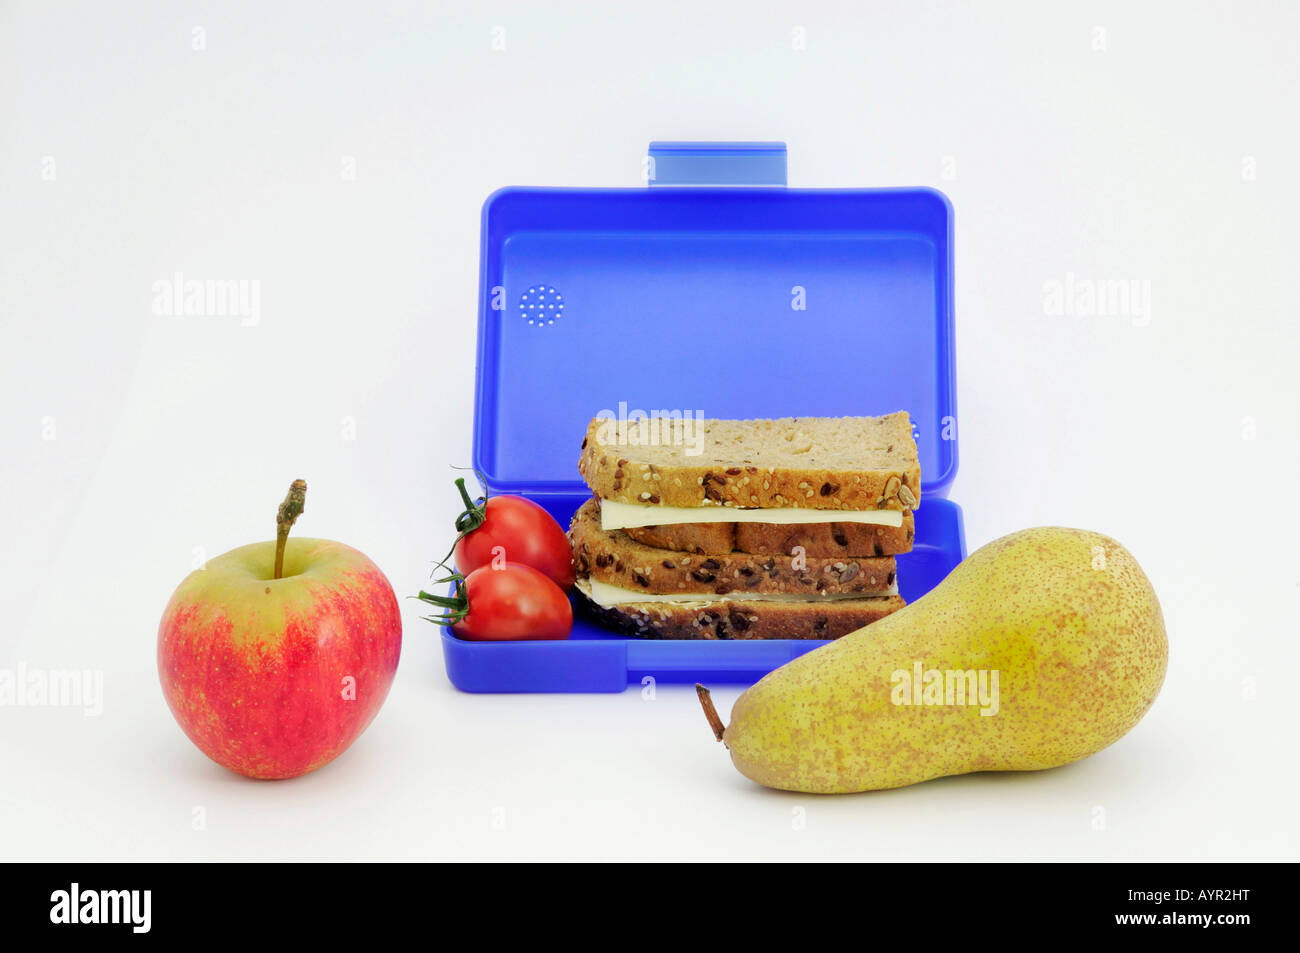 Blue breadbox filled with sandwiches and tomatoes, fruit in foreground Stock Photo